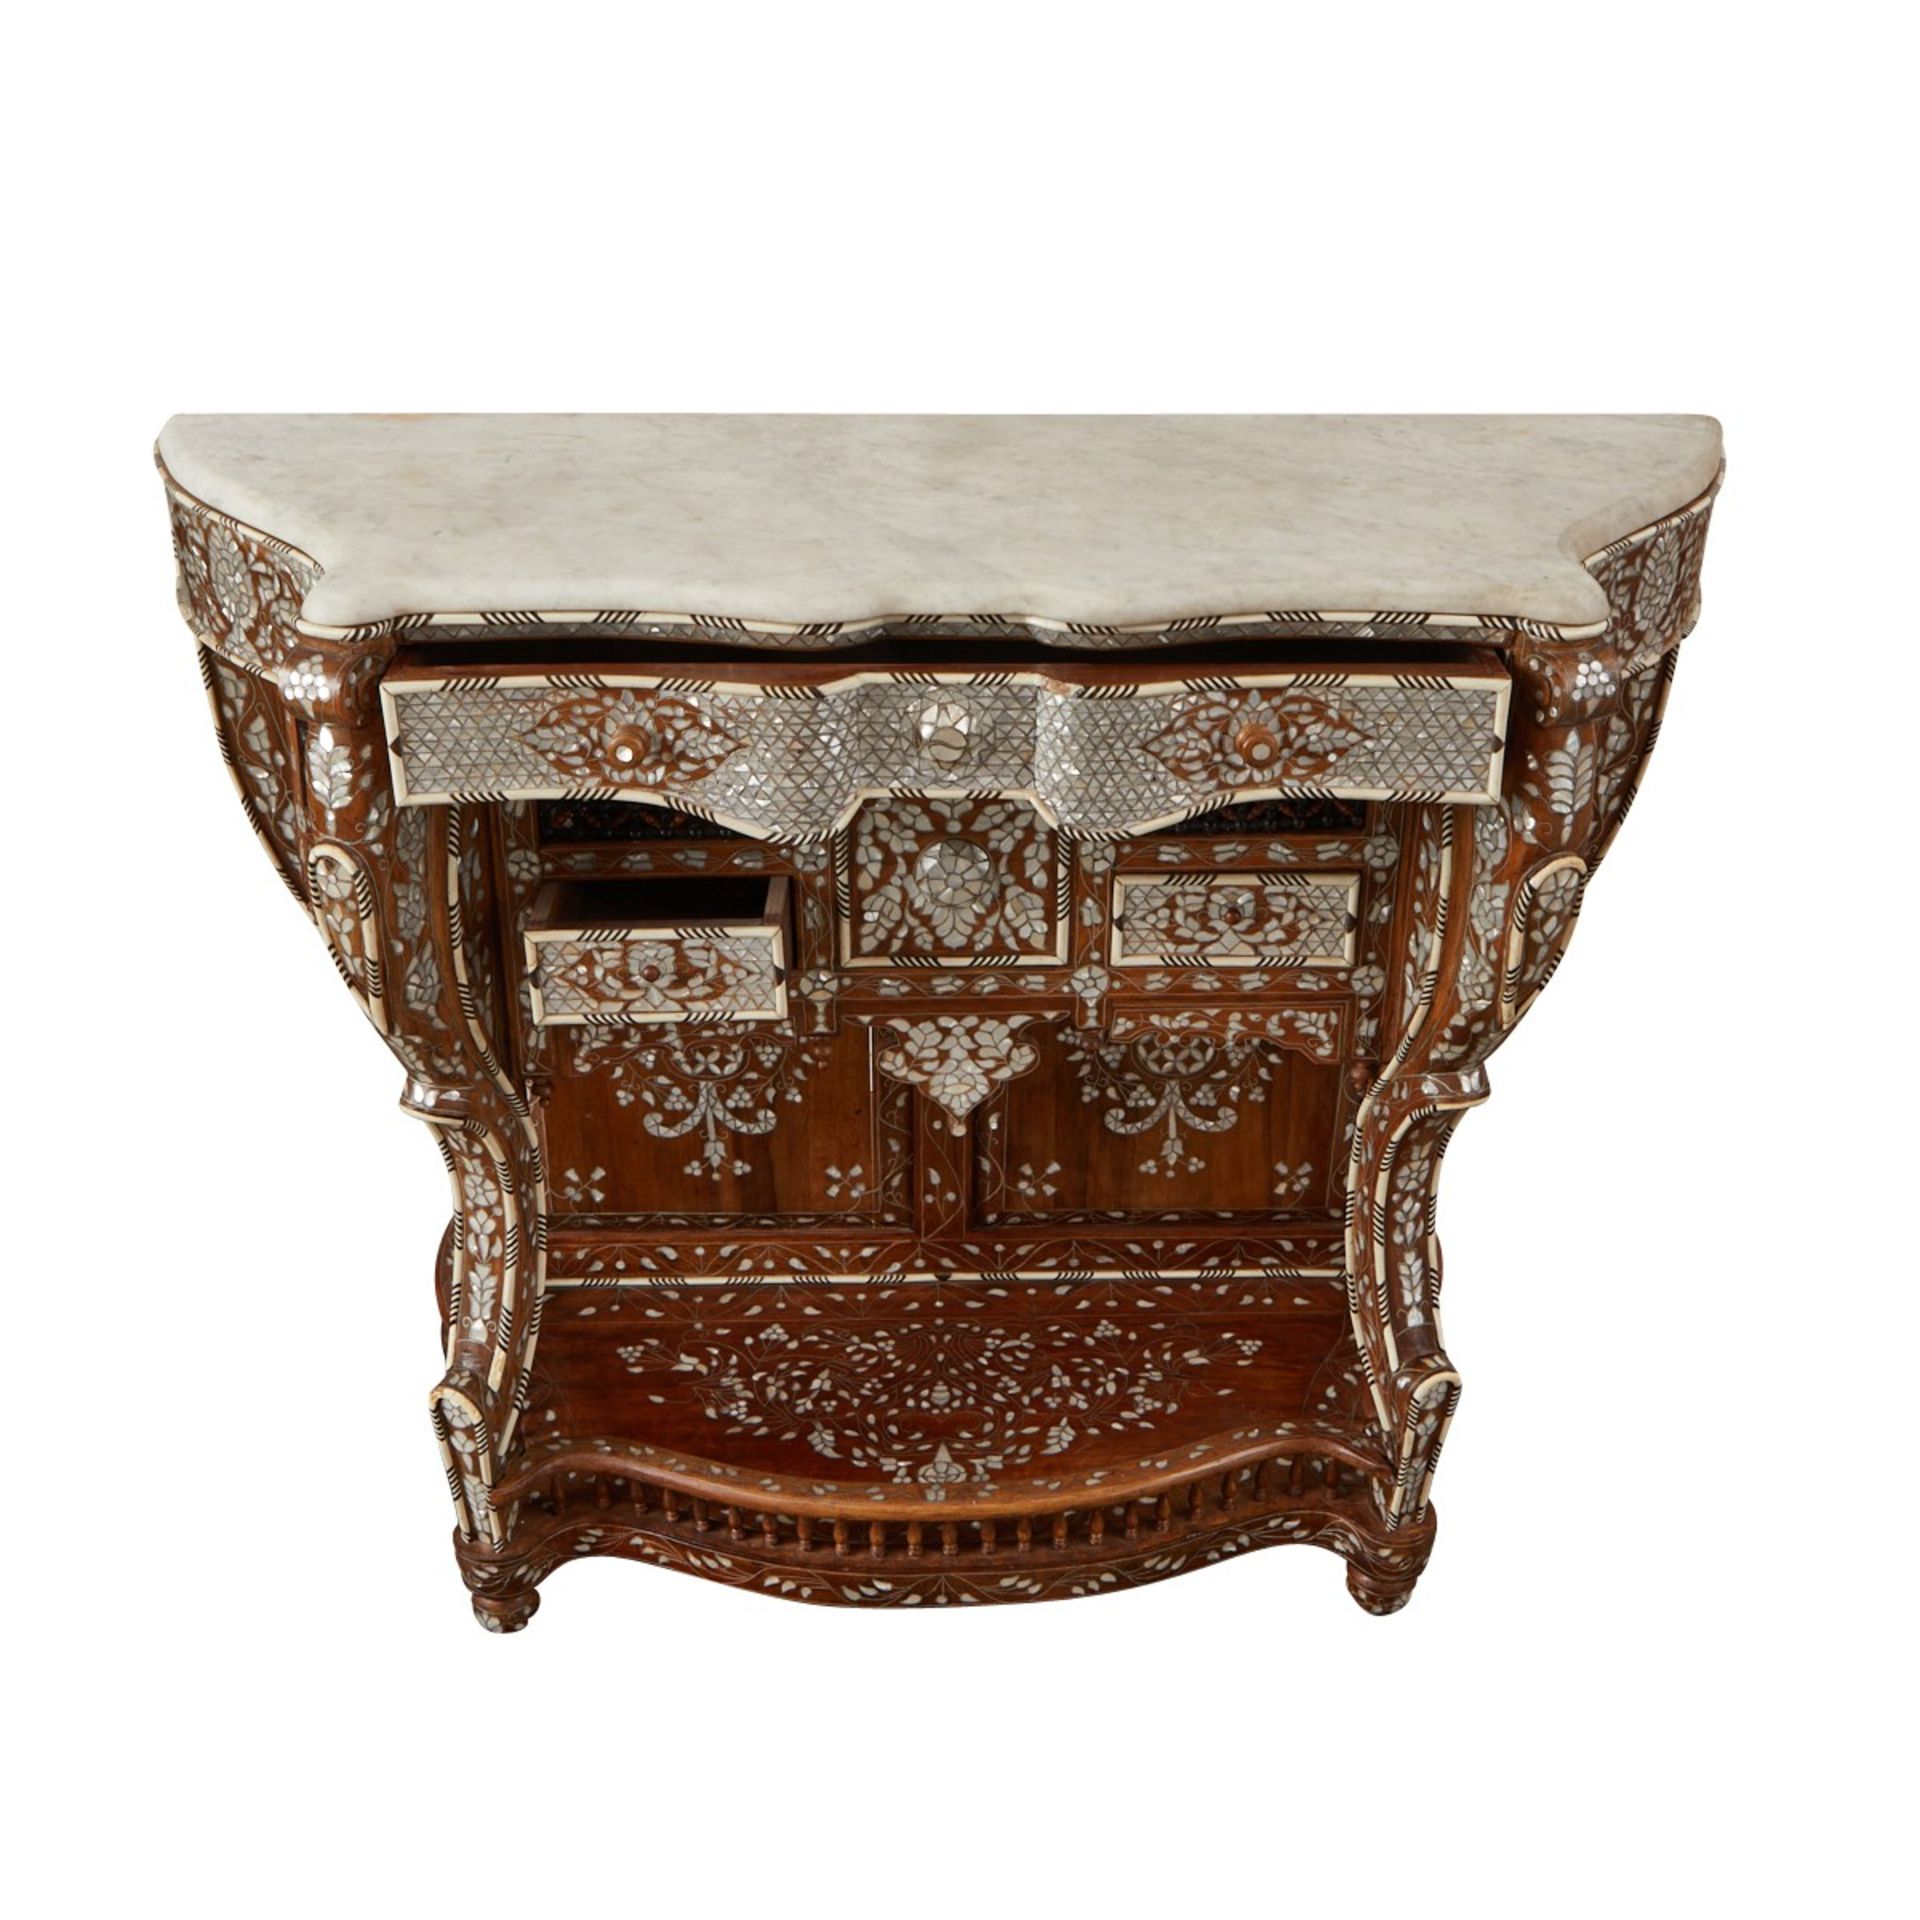 Levantine Mother of Pearl Inlaid Hall Table - Image 2 of 8